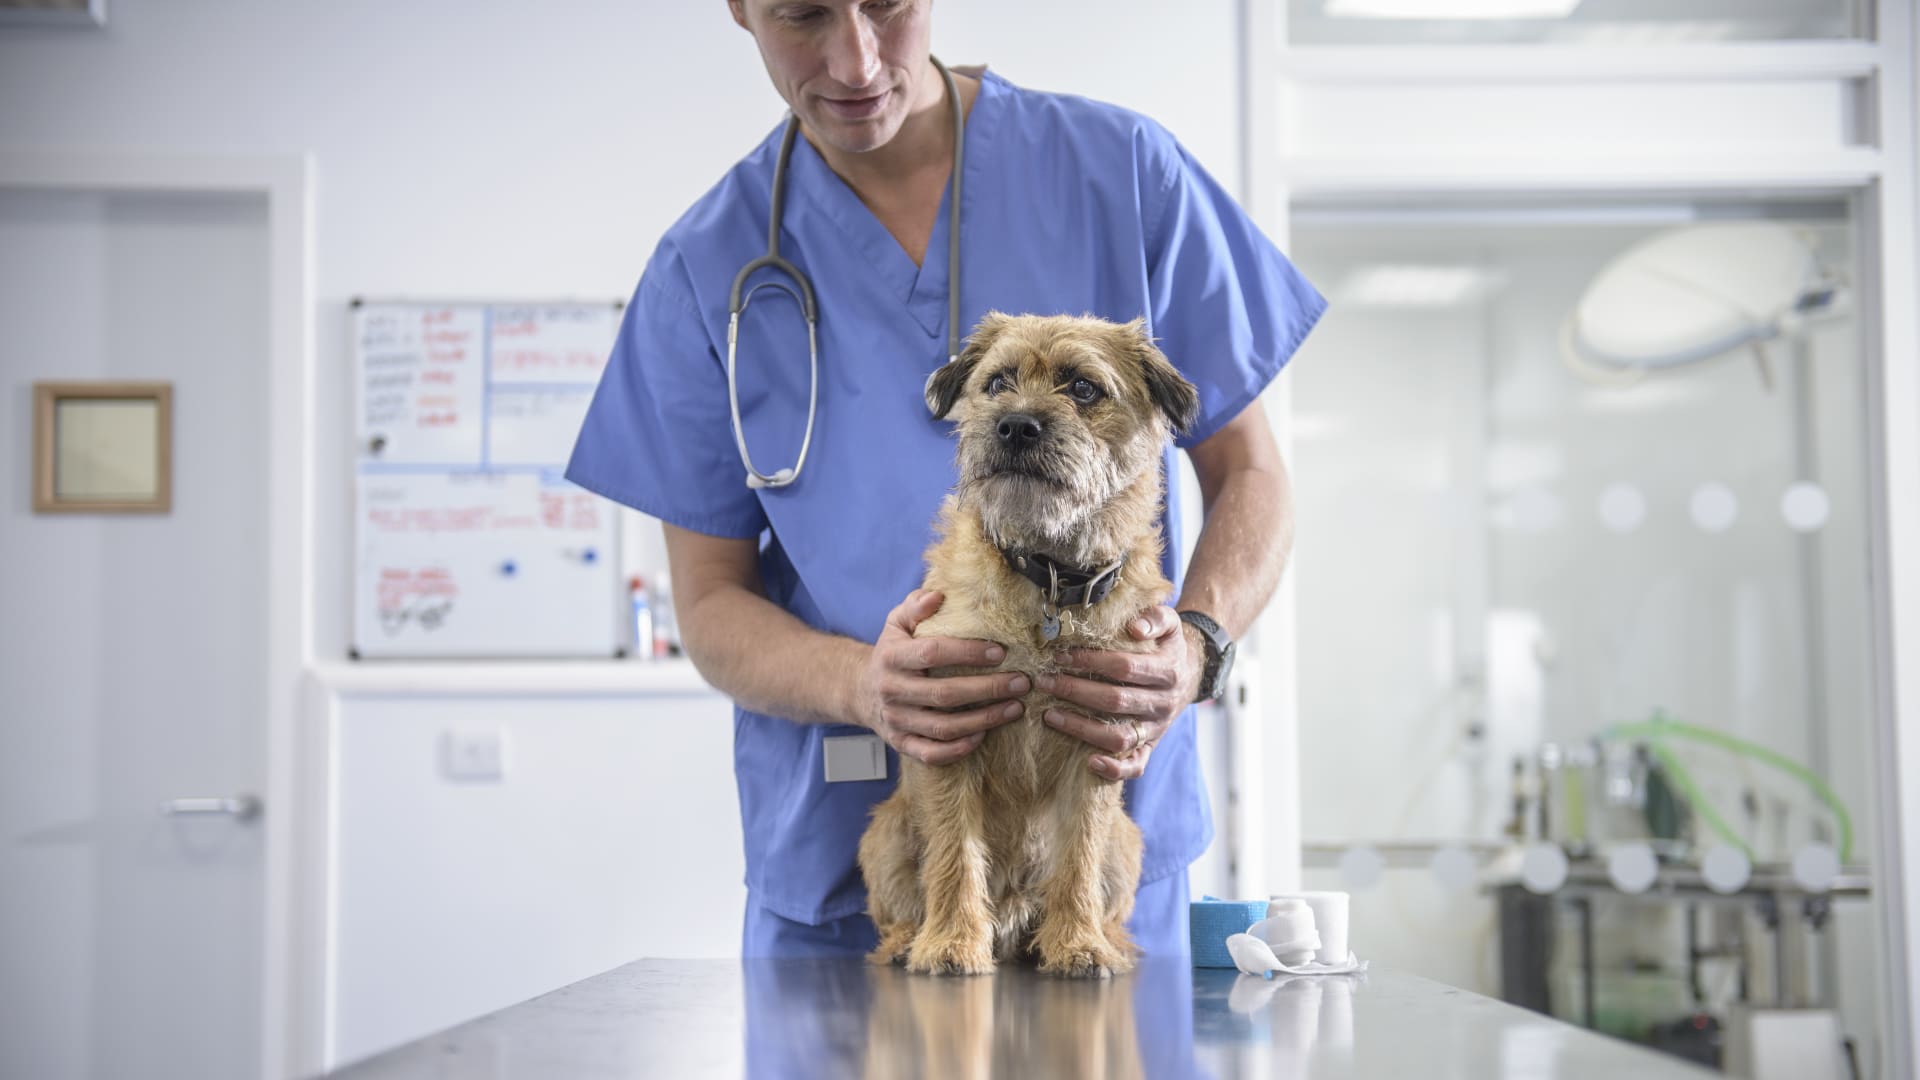 The pet drugs vets are now prescribing look a lot more like human medications